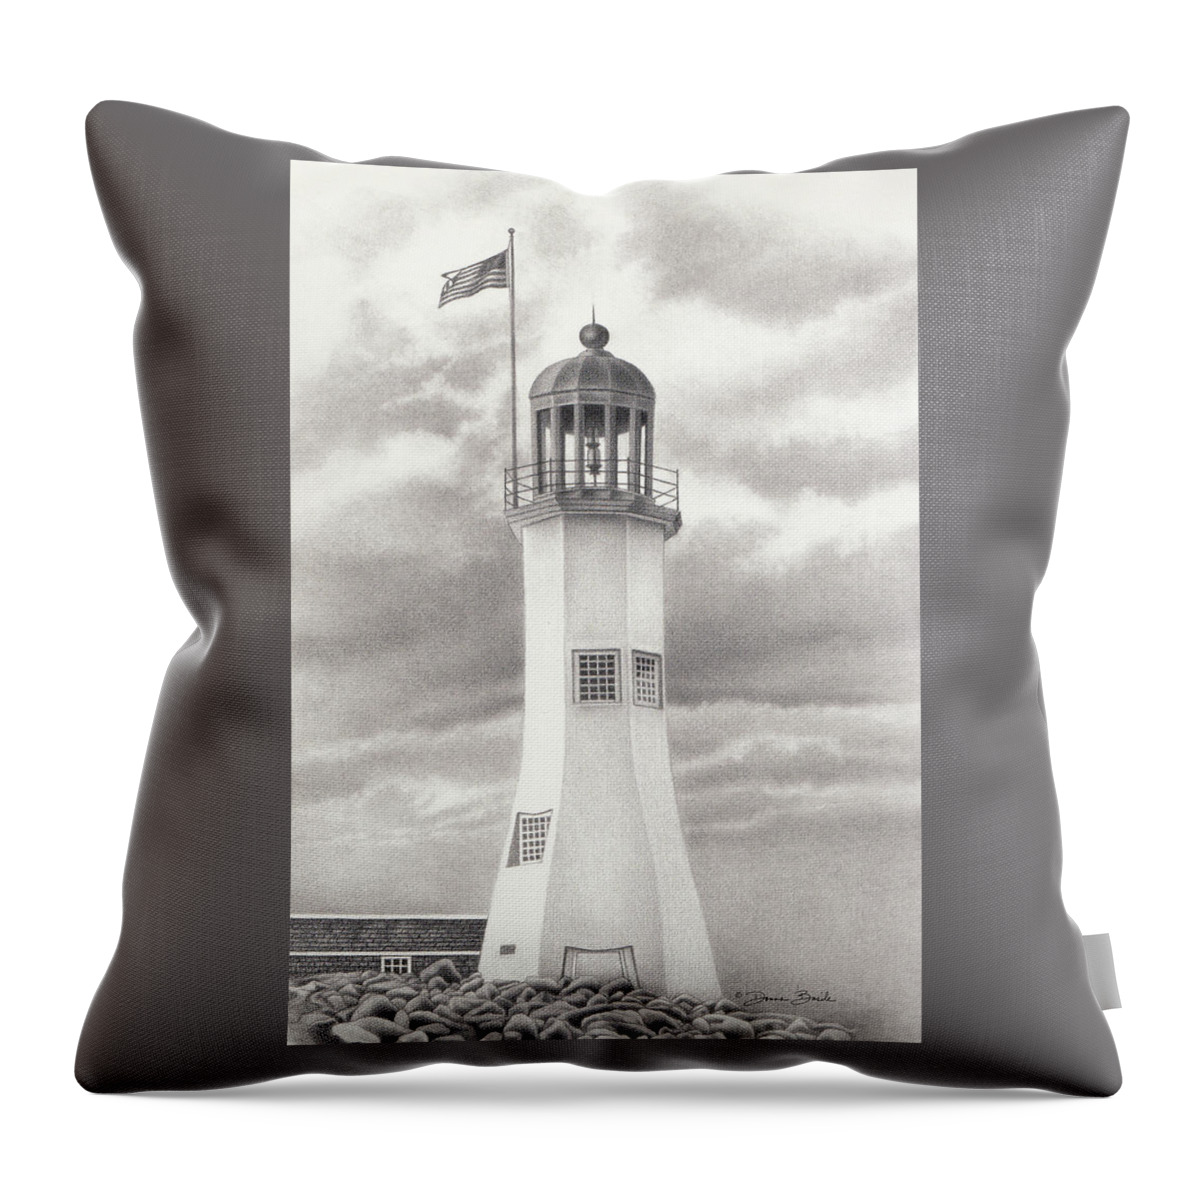 Scituate Throw Pillow featuring the drawing Scituate Light by Donna Basile